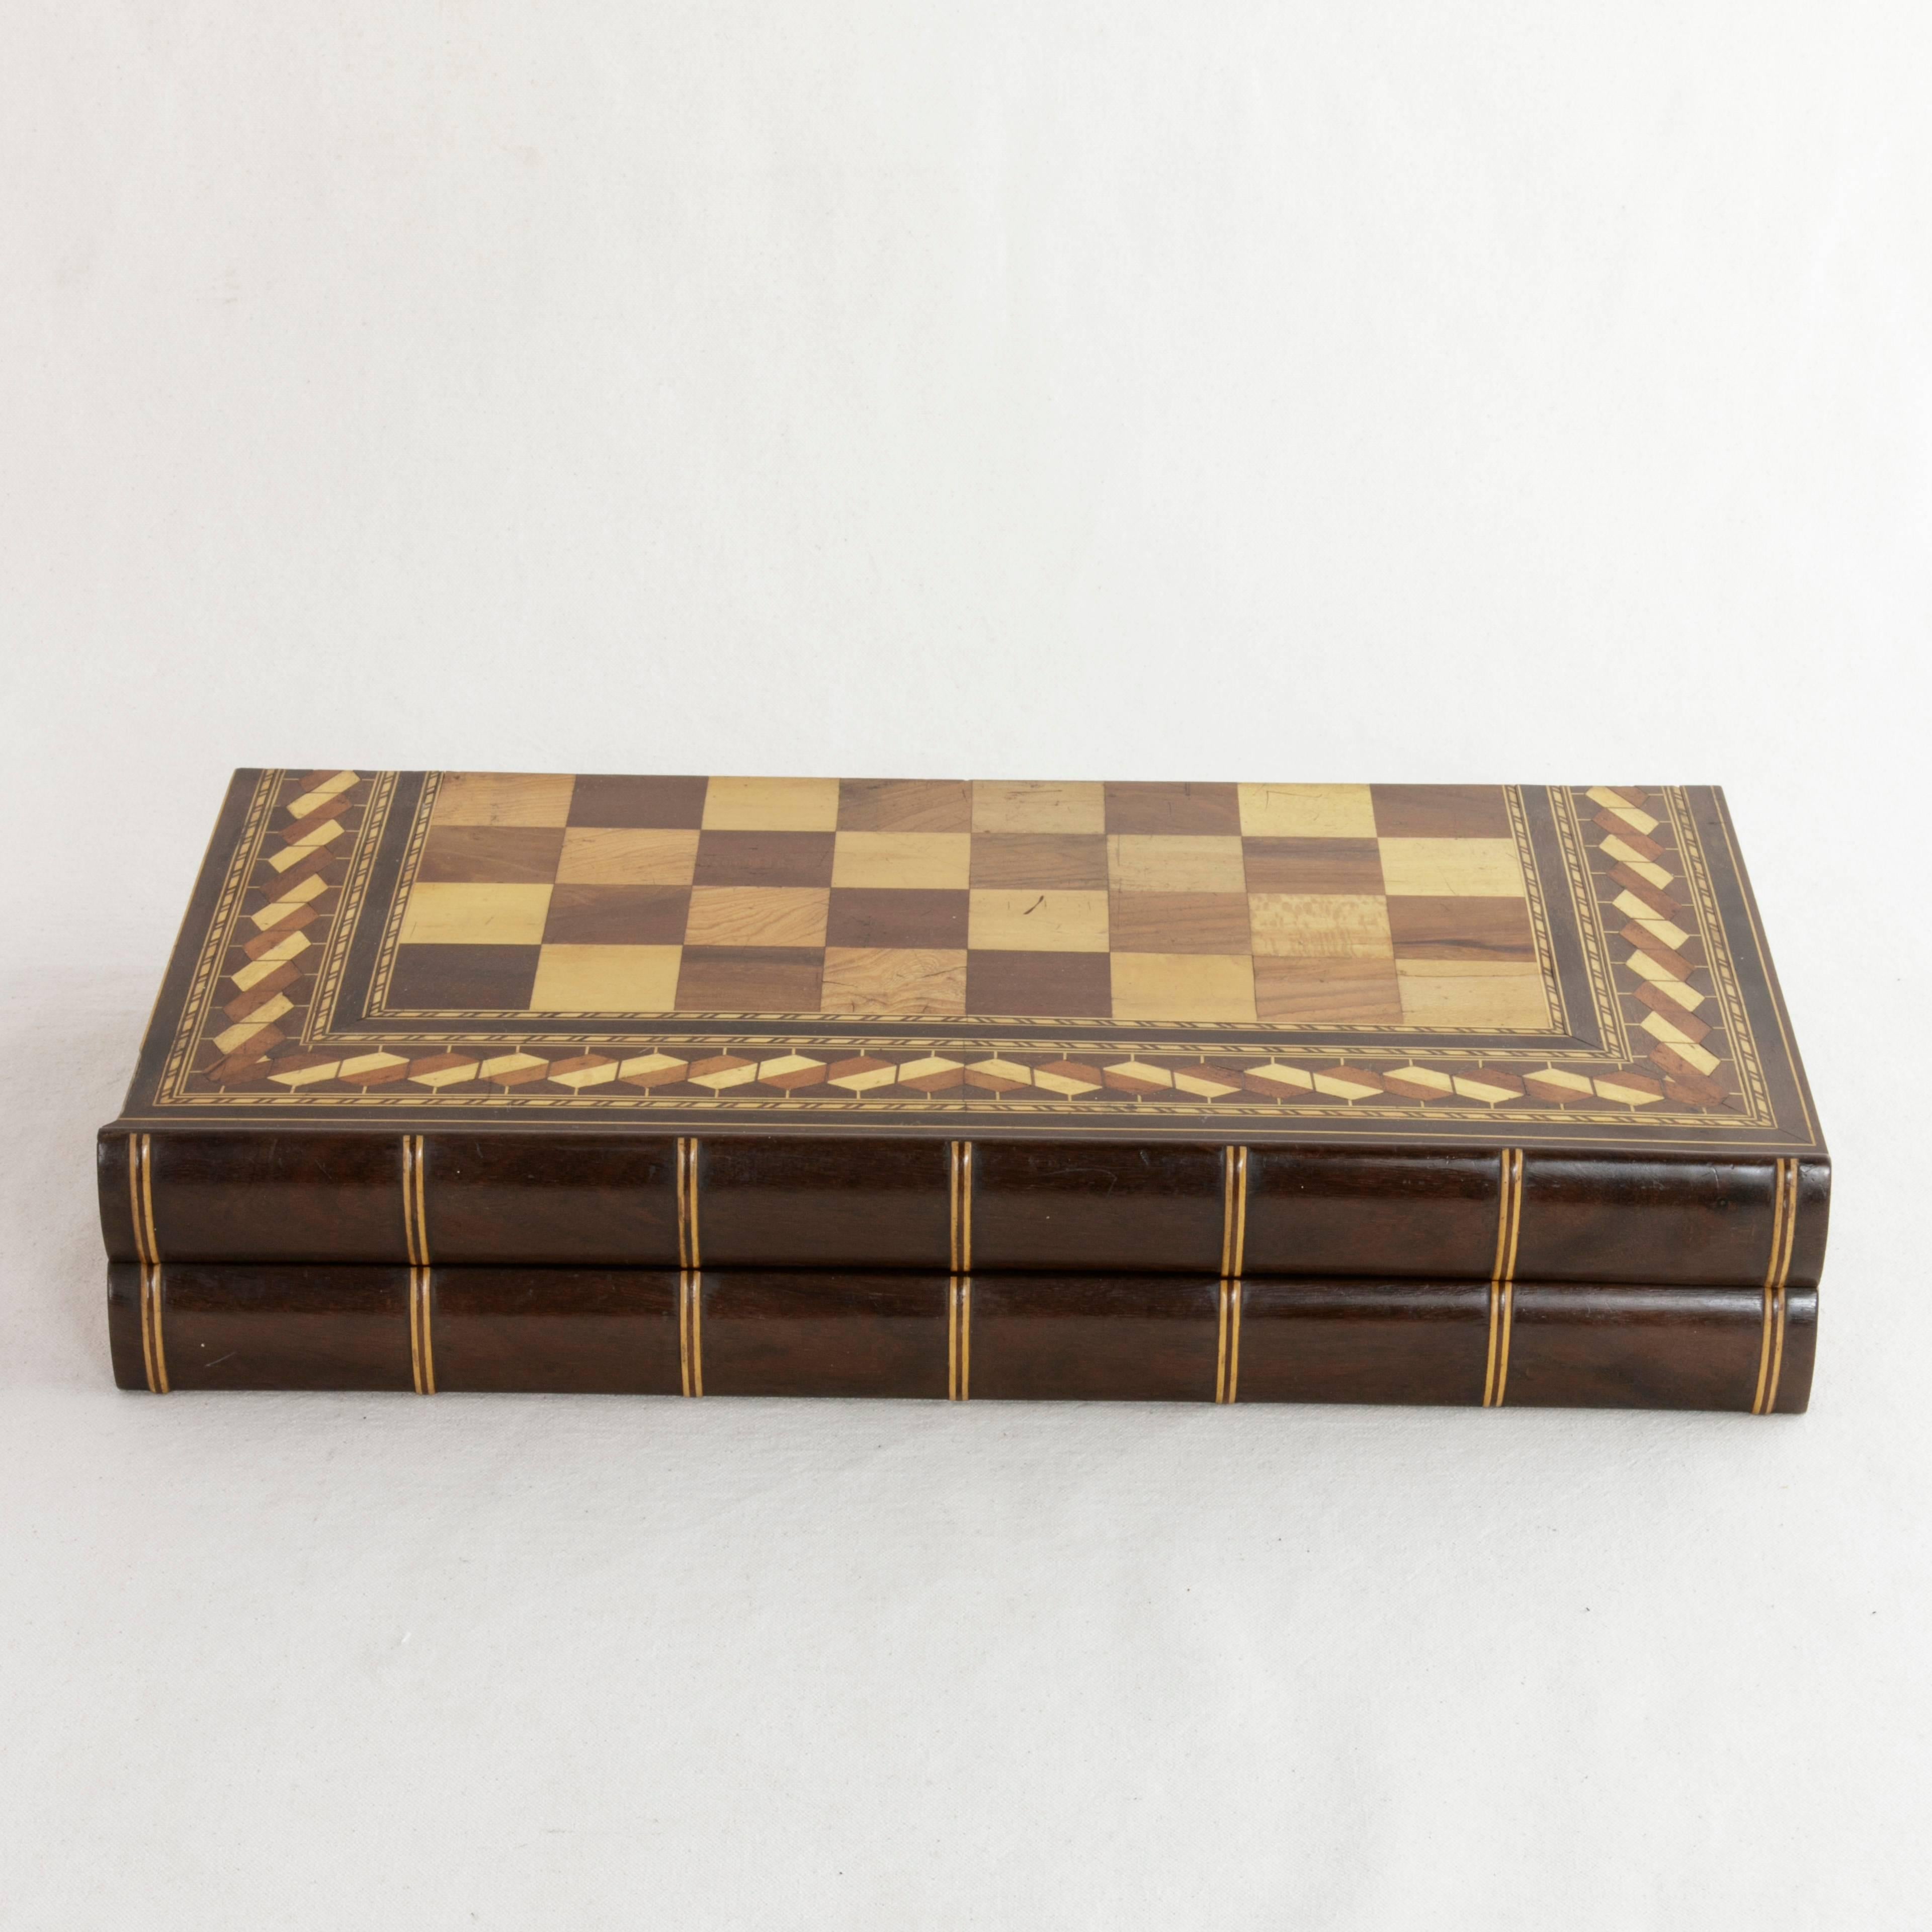 Inlay Hinged Marquetry Game Box for Chess, Checkers, Backgammon, Stacked Books Form